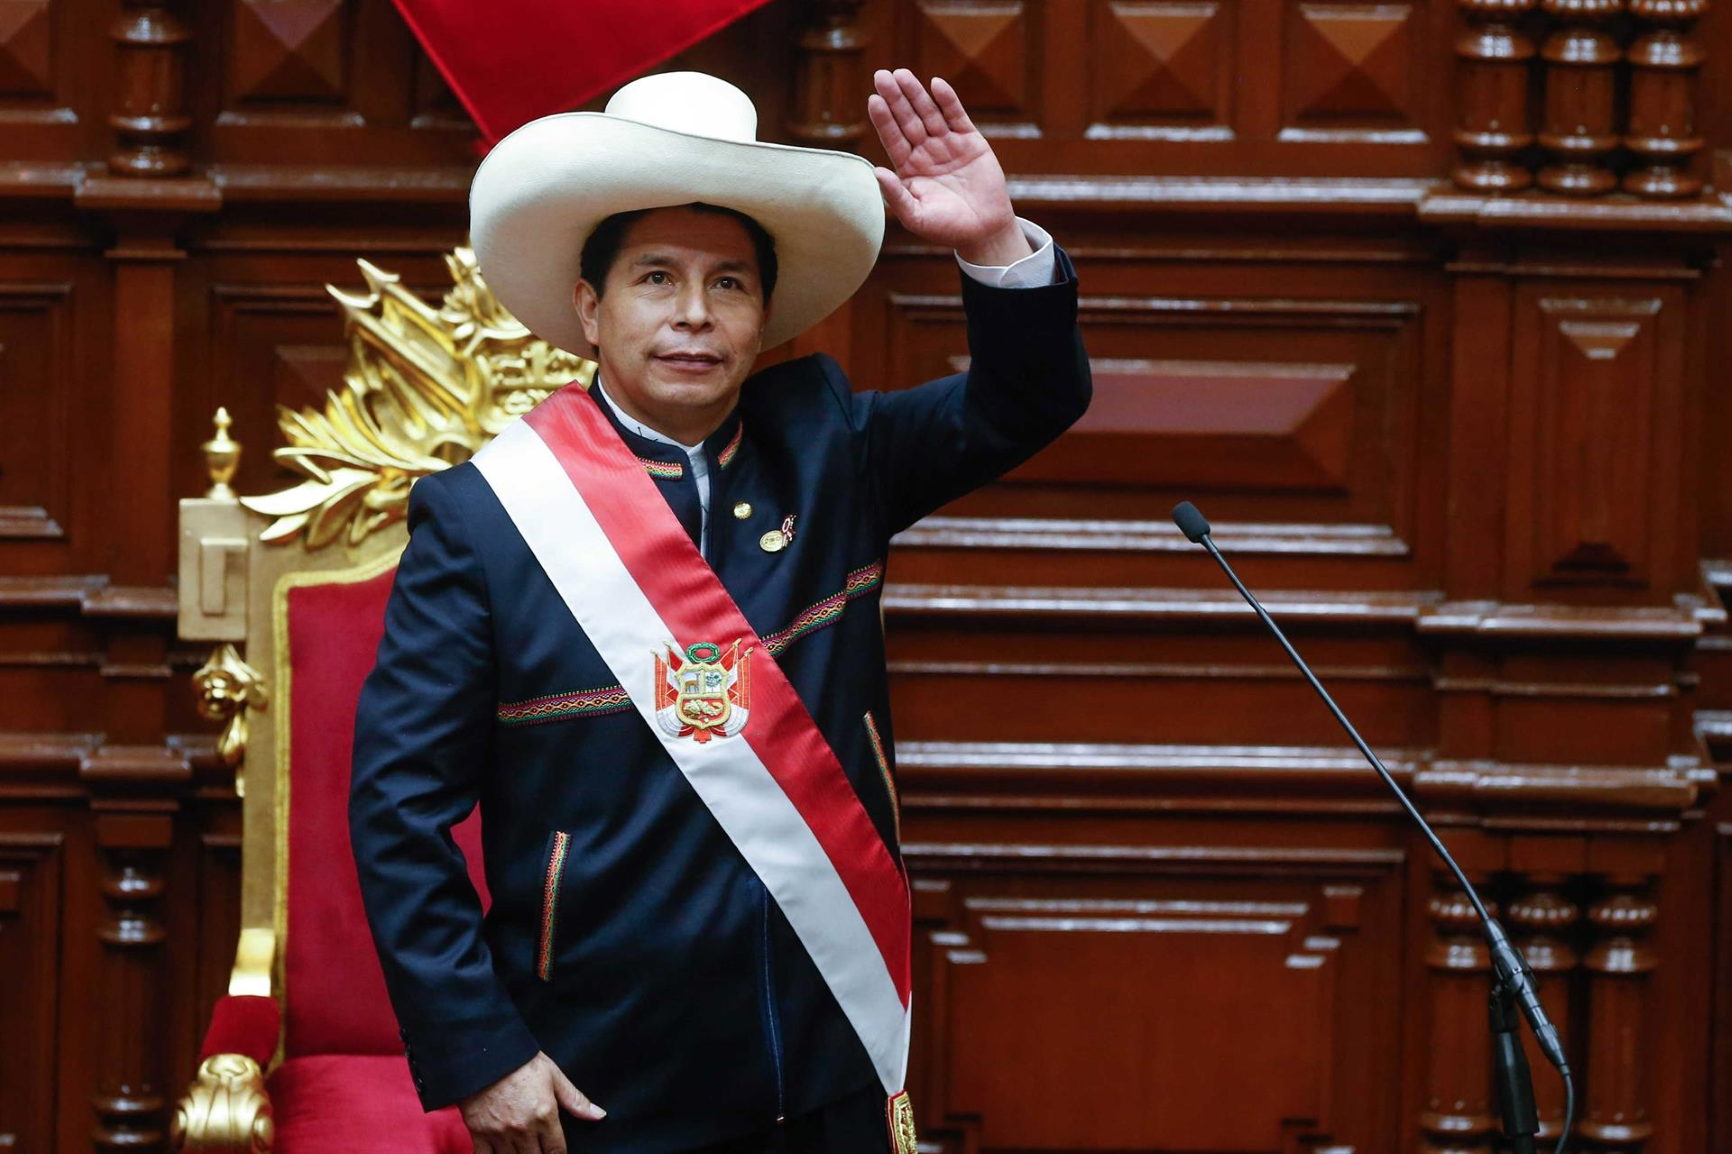 President of Peru orders the dissolution of Congress and establishes an emergency government